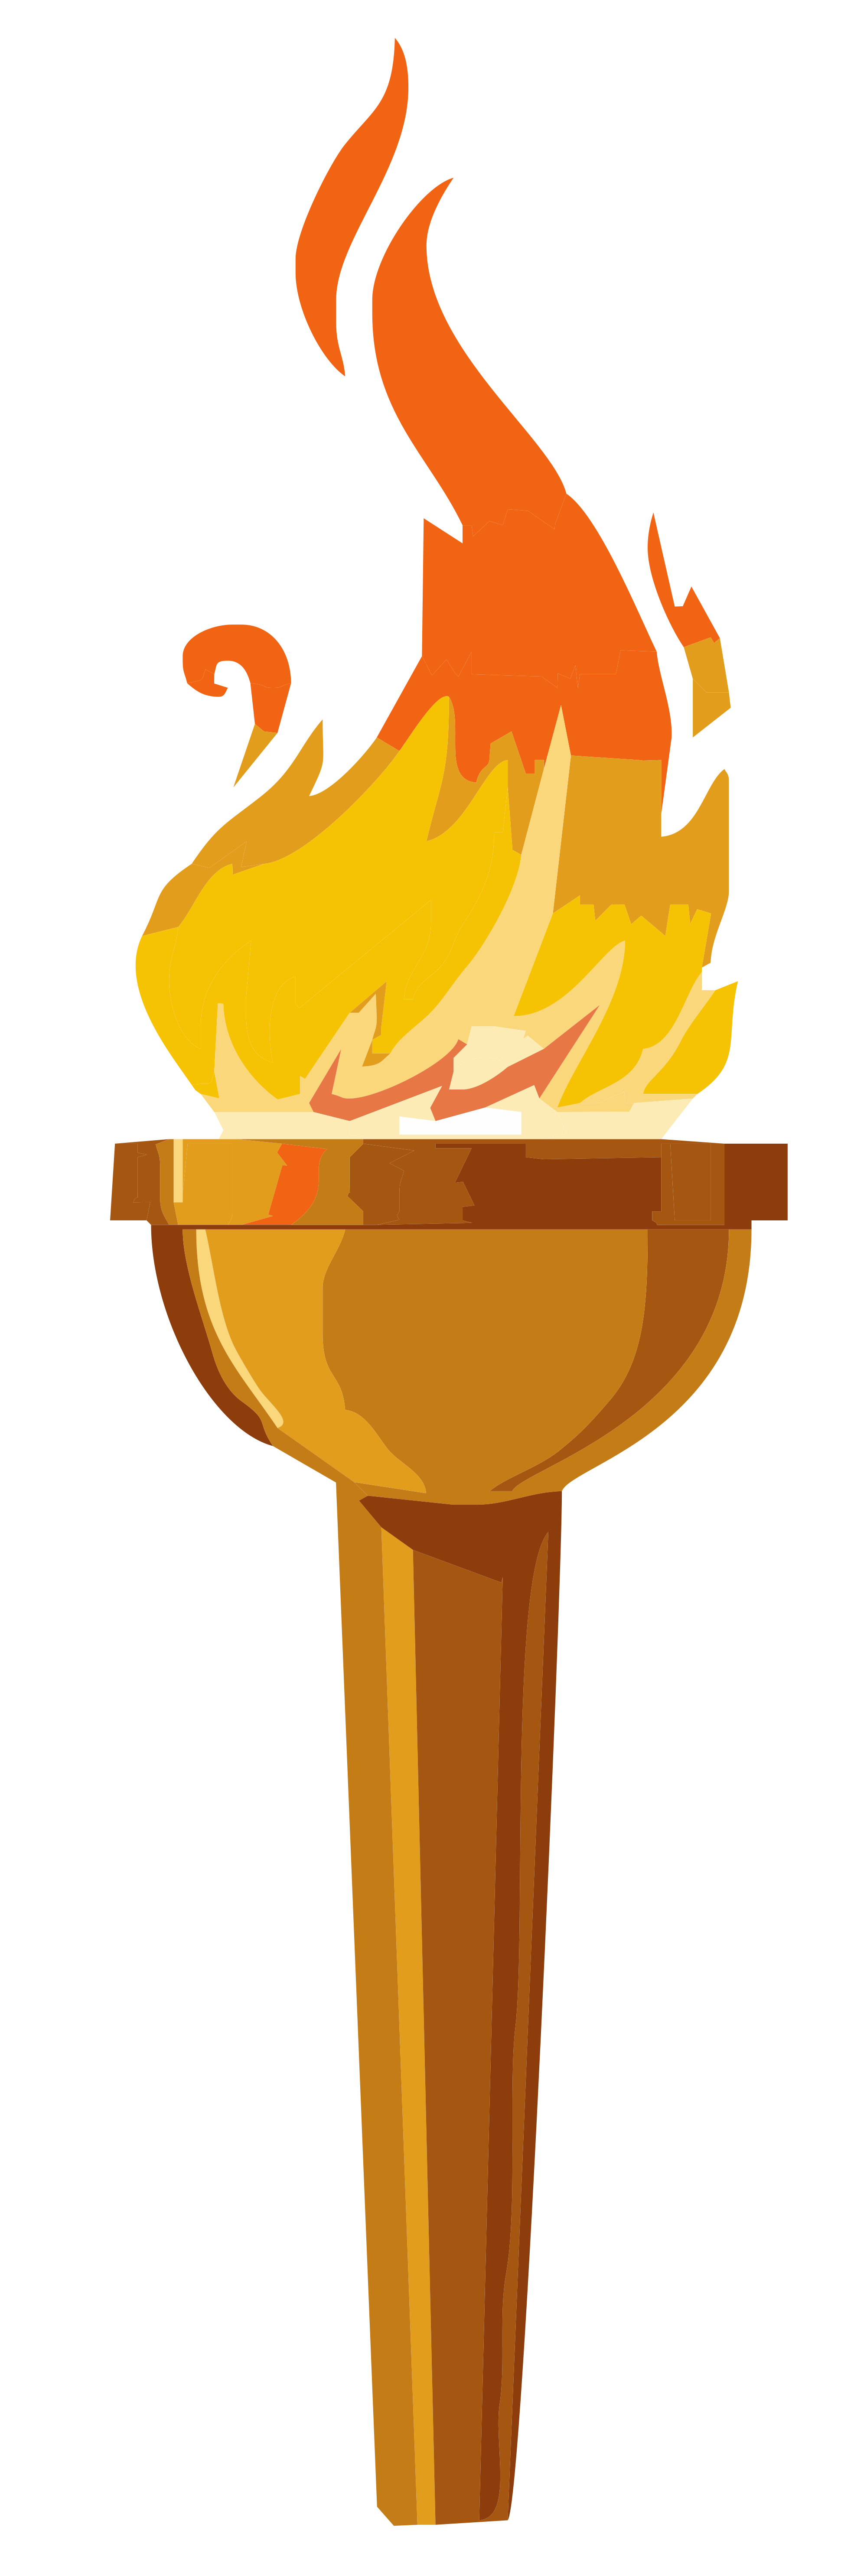 Olympic Torch Logo Download Logo Icon Png Svg - Riset